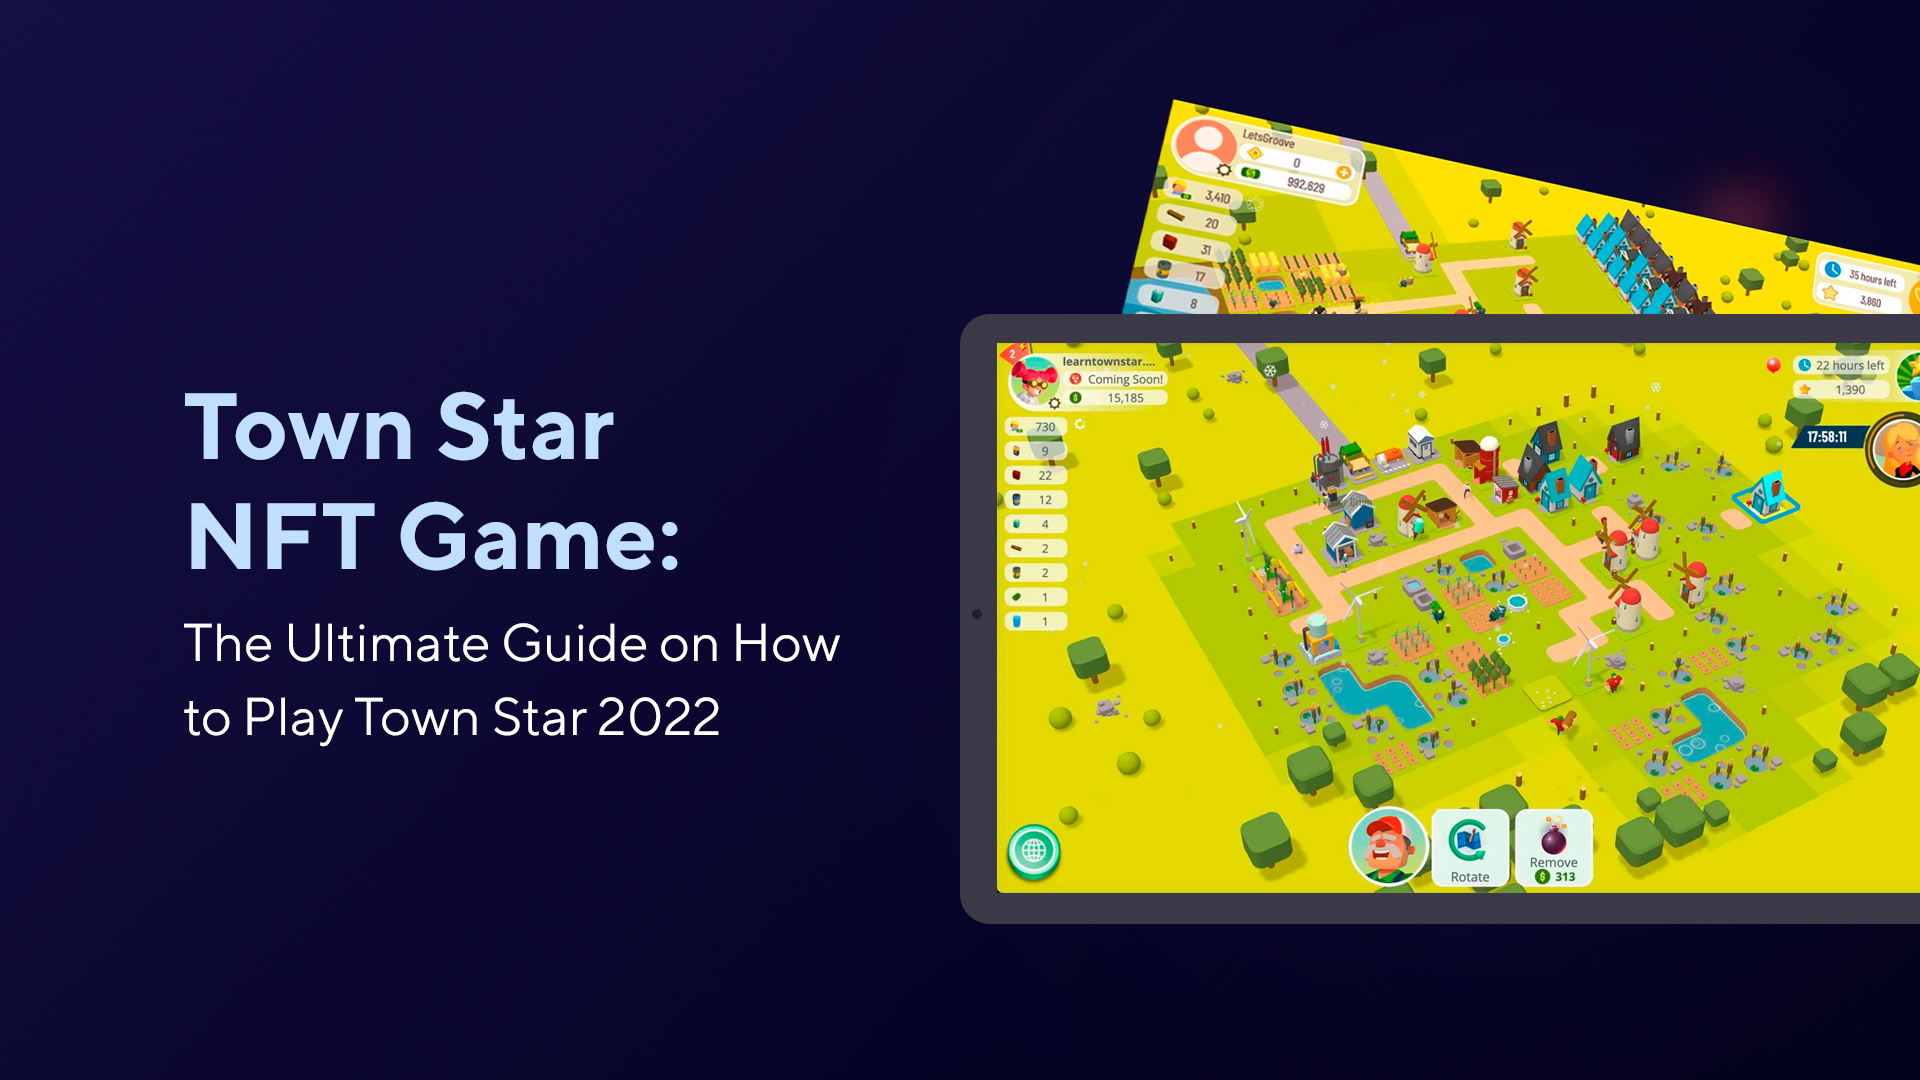 Town Star NFT Game: The Ultimate Guide on How to Play Town Star 2022